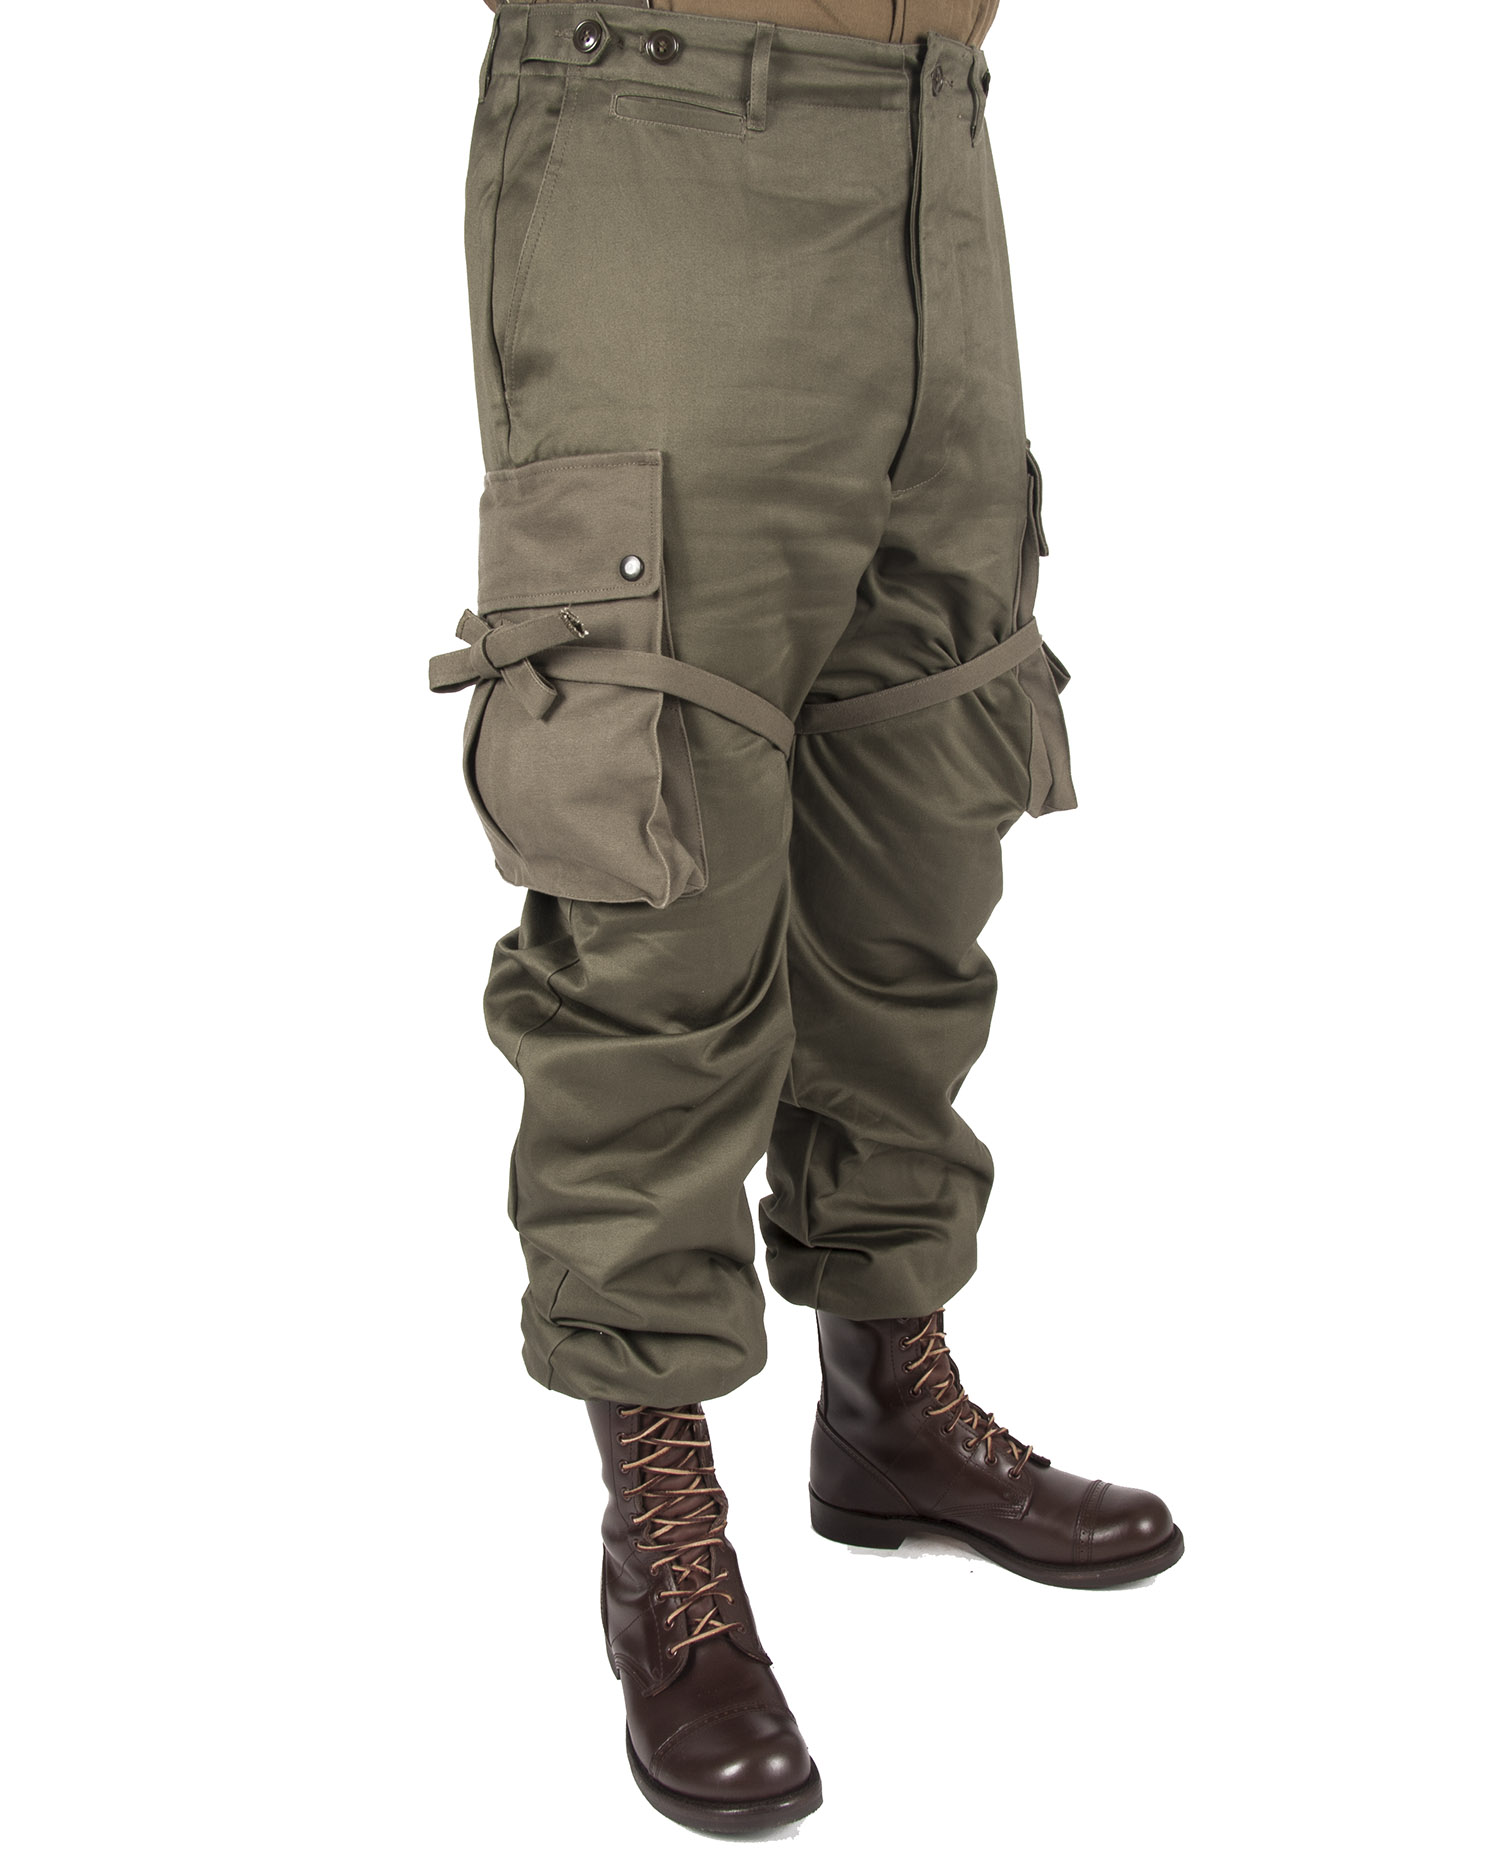 WWII US Army M43 Paratrooper Field Trousers